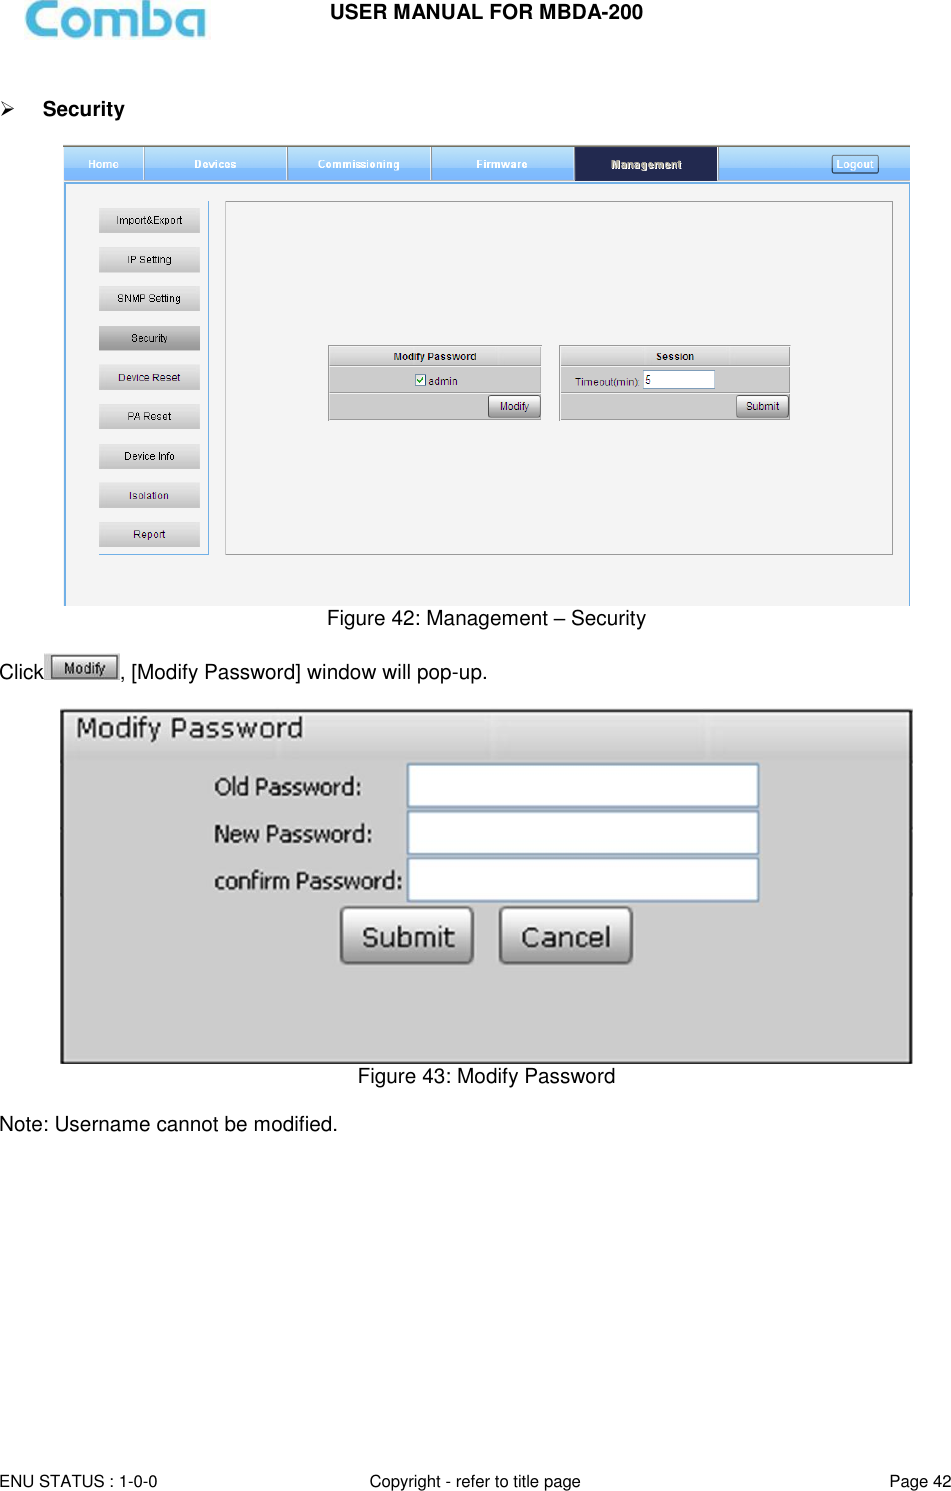 USER MANUAL FOR MBDA-200  ENU STATUS : 1-0-0 Copyright - refer to title page Page 42       Security    Figure 42: Management – Security  Click , [Modify Password] window will pop-up.    Figure 43: Modify Password  Note: Username cannot be modified.    